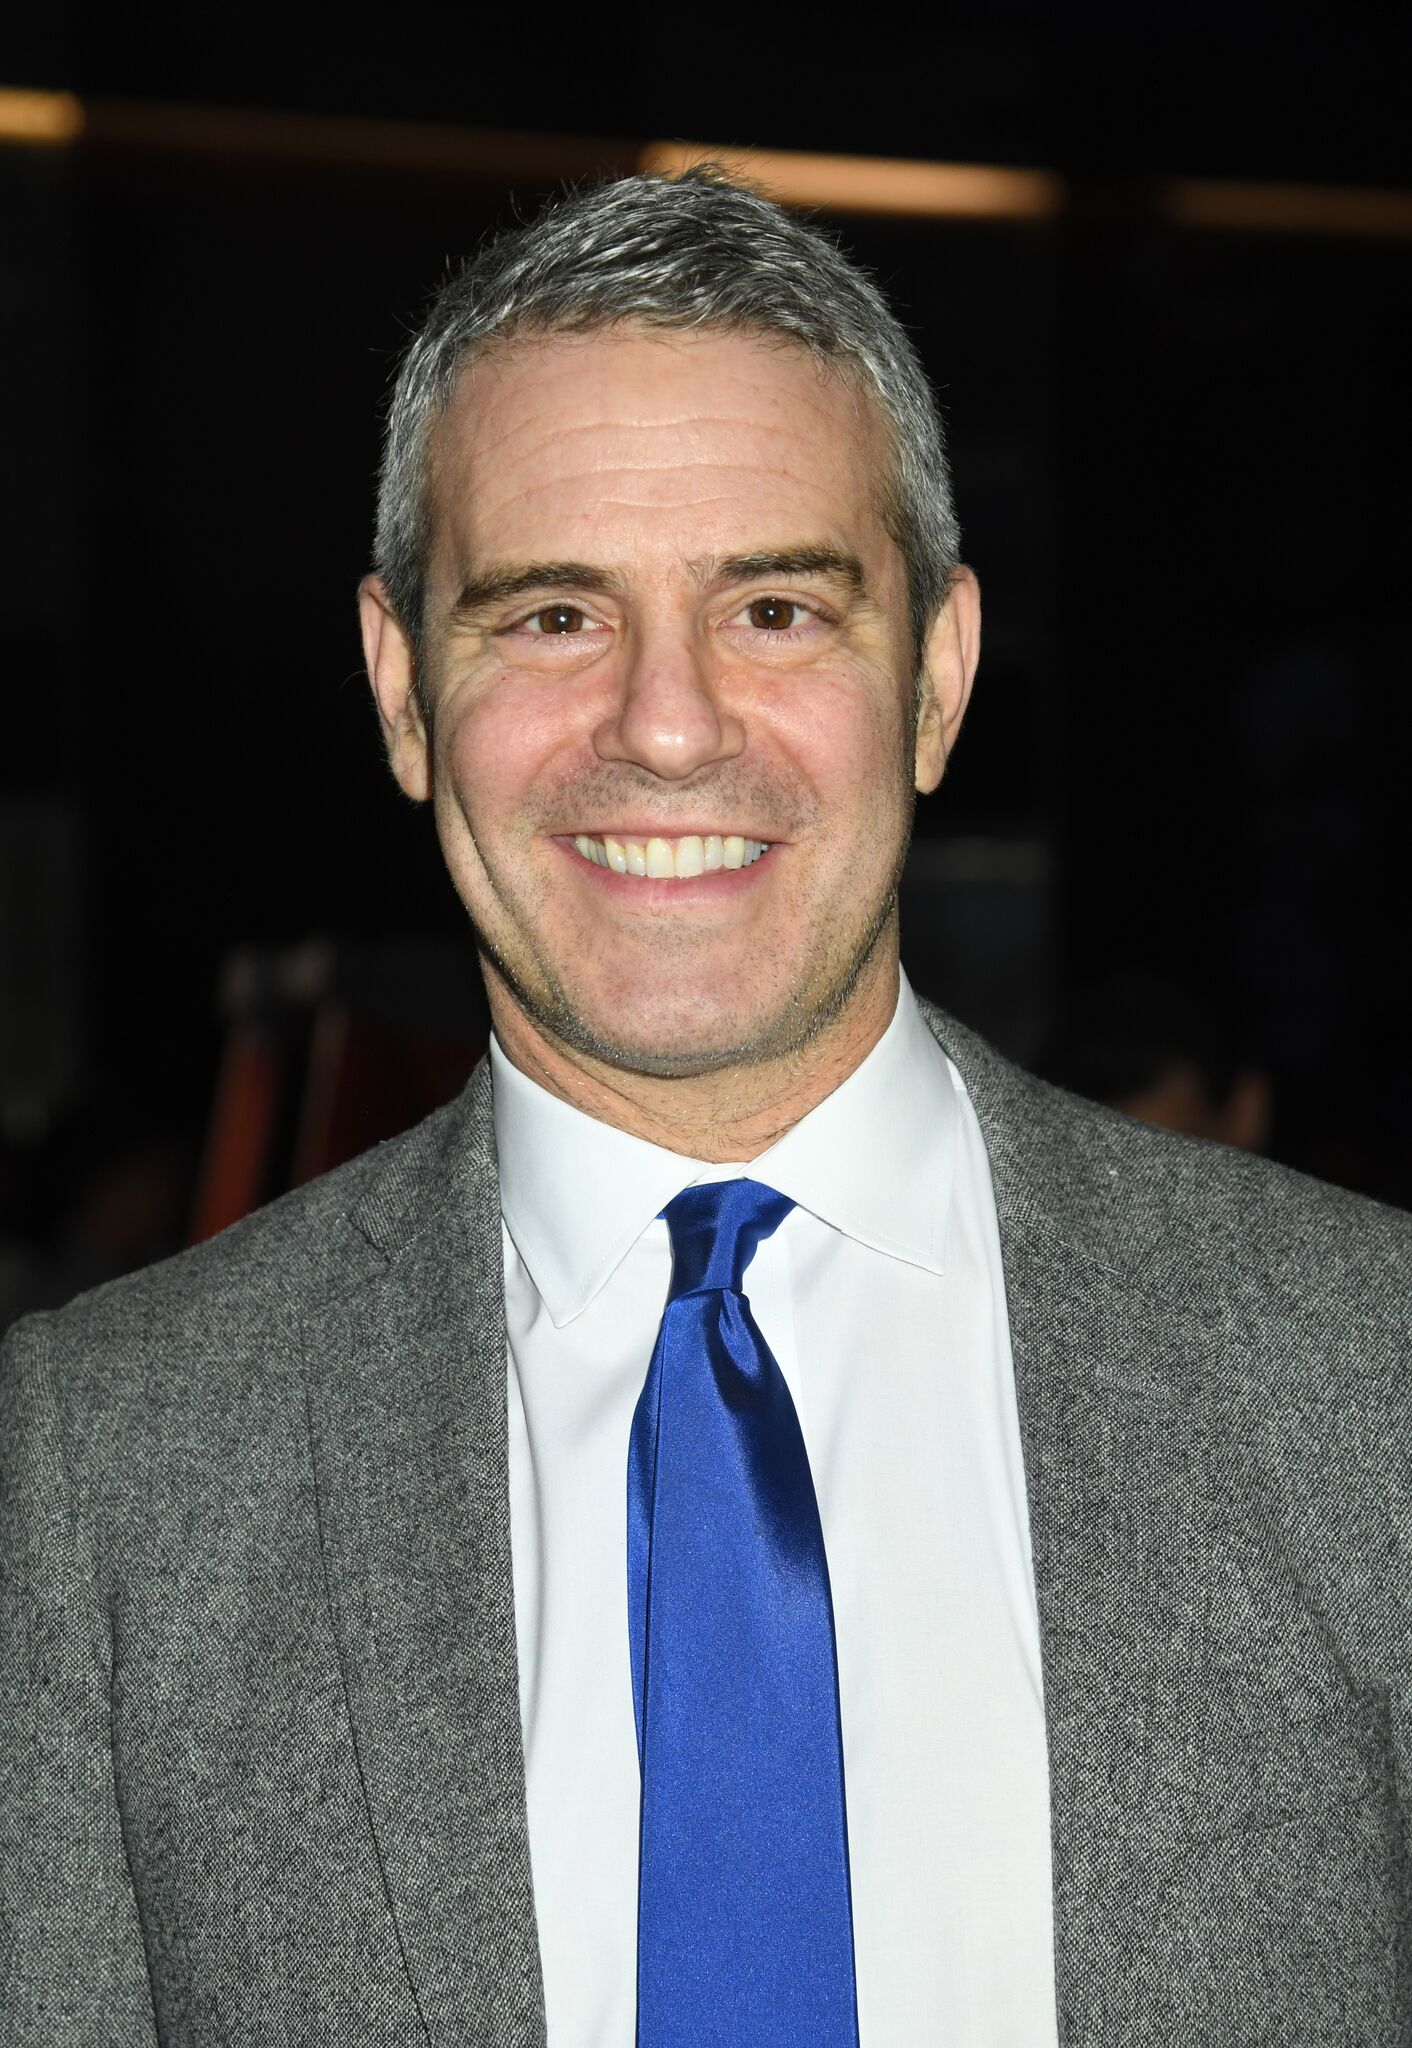 Andy Cohen attends the Watches Of Switzerland Hudson Yards  | Getty Images